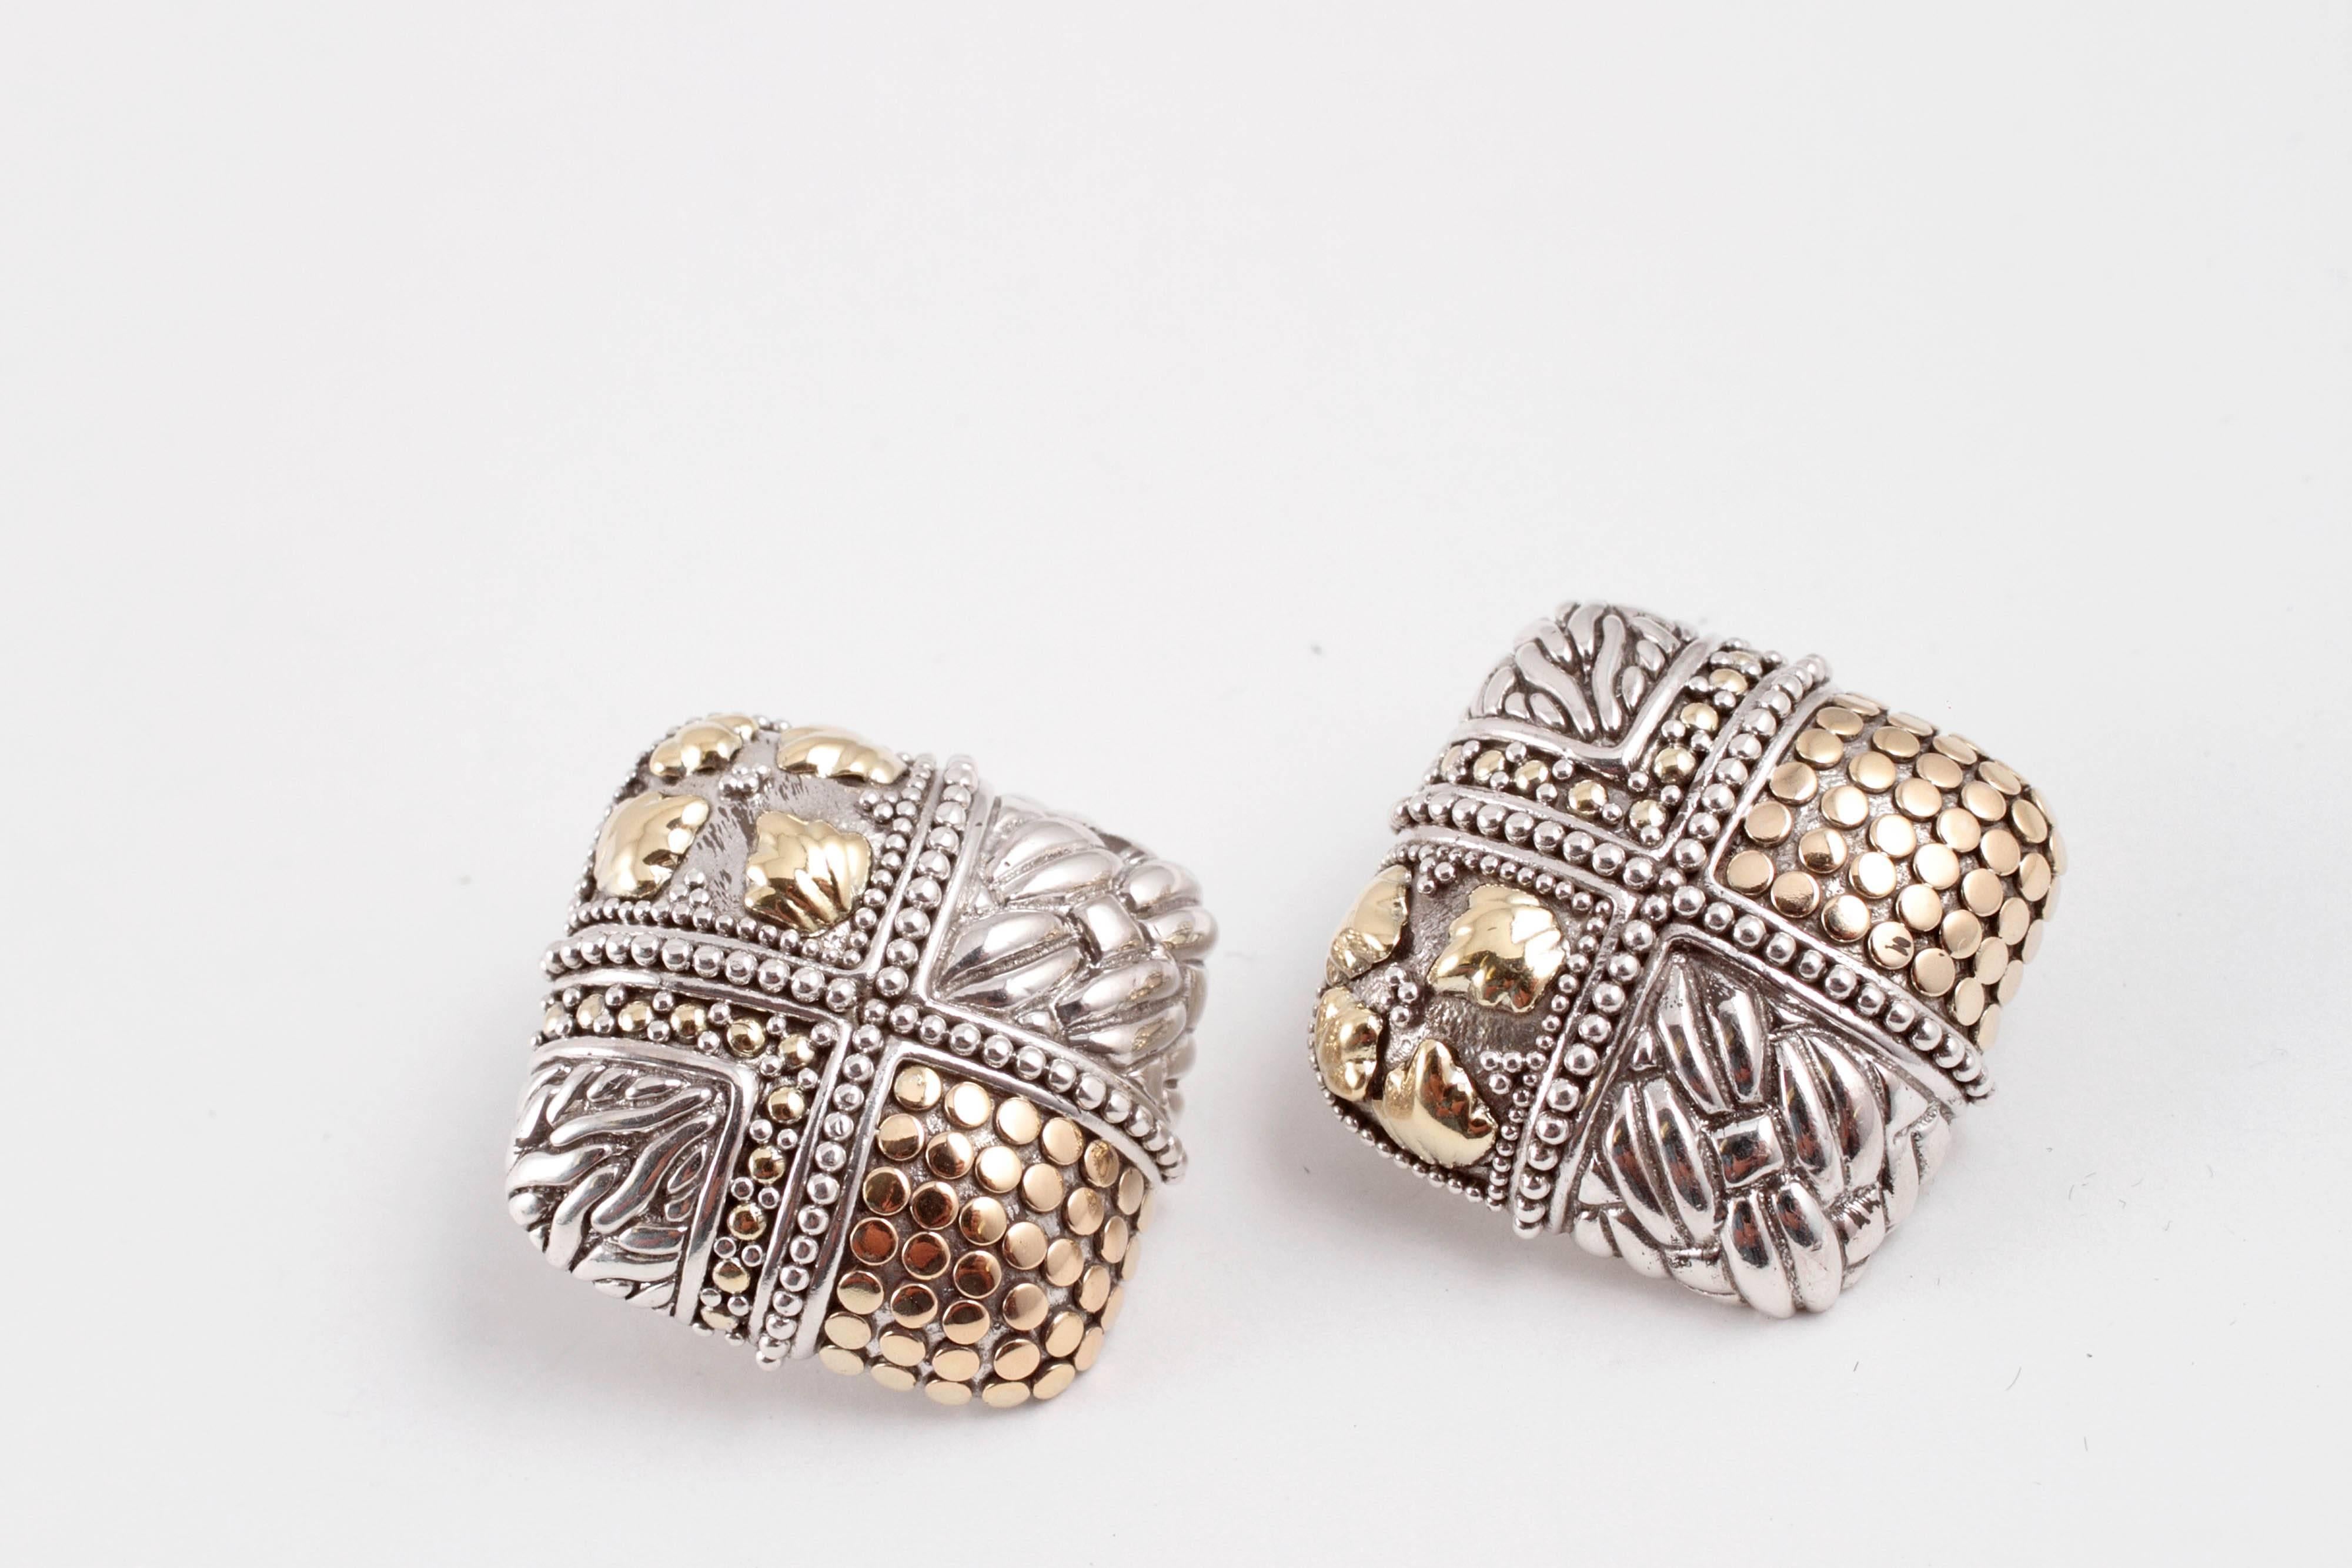 John Hardy square earrings in sterling silver with 18 karat yellow gold accents and comfortable omega backs.